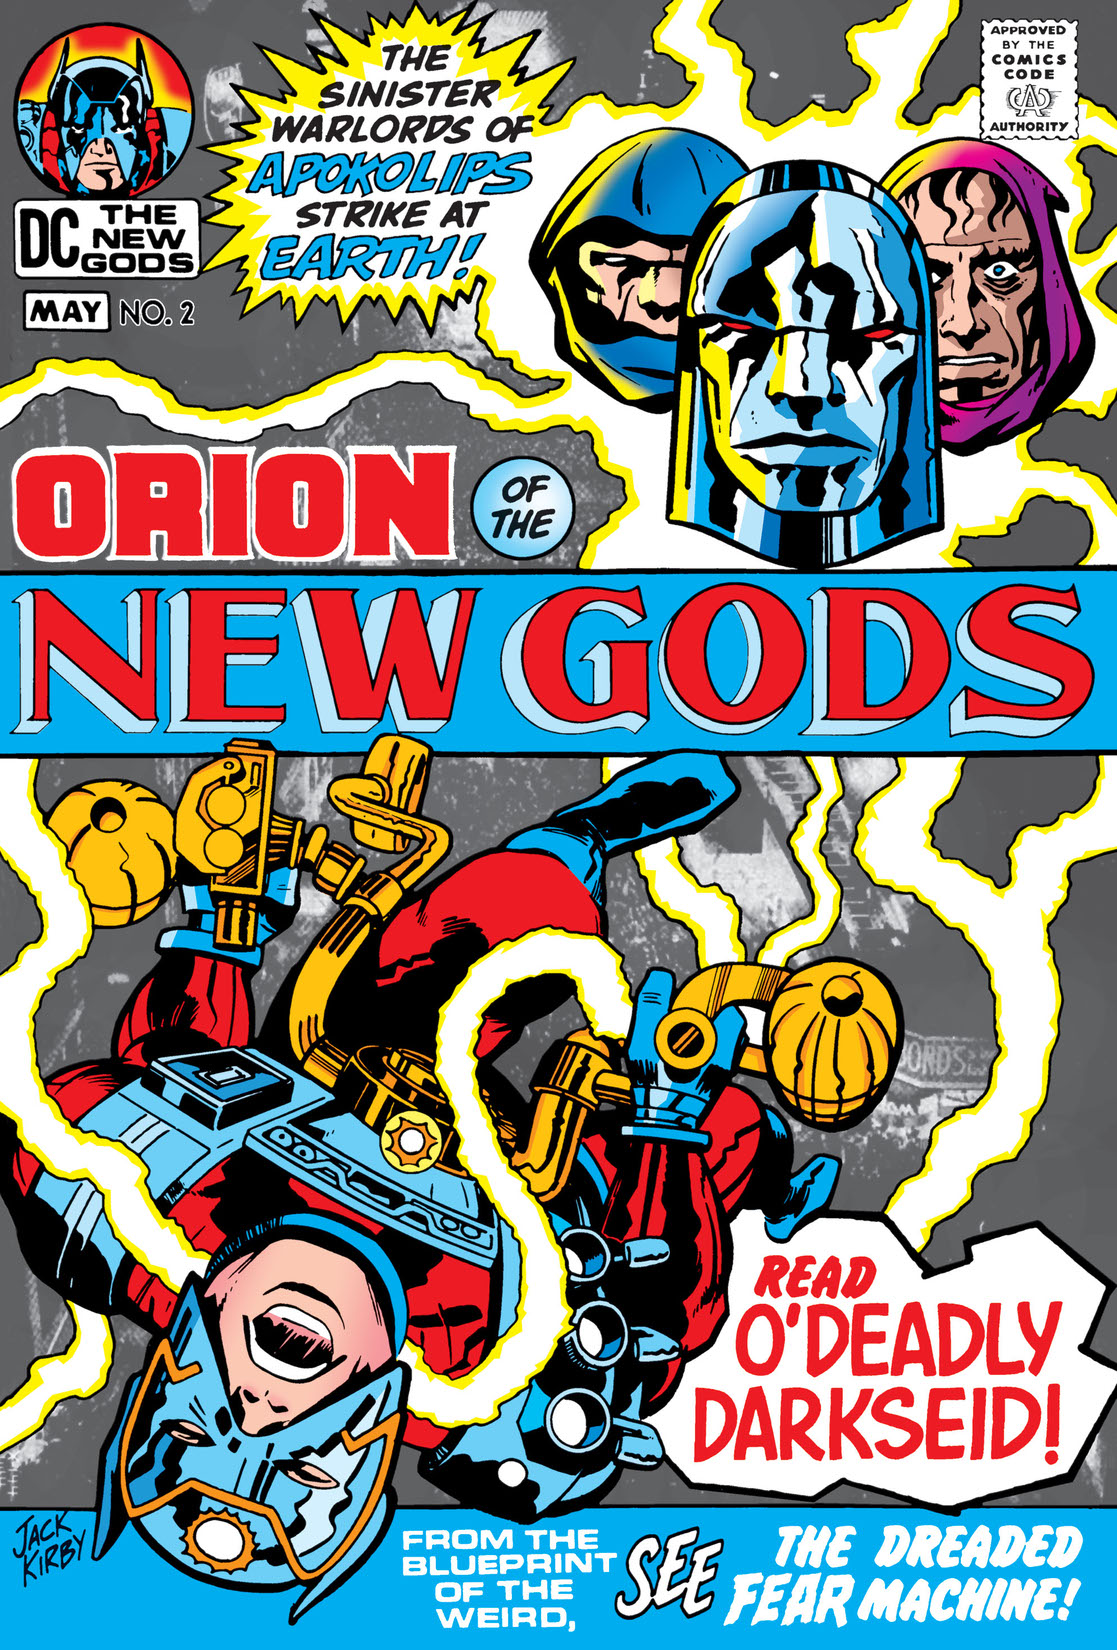 The New Gods #2 preview images